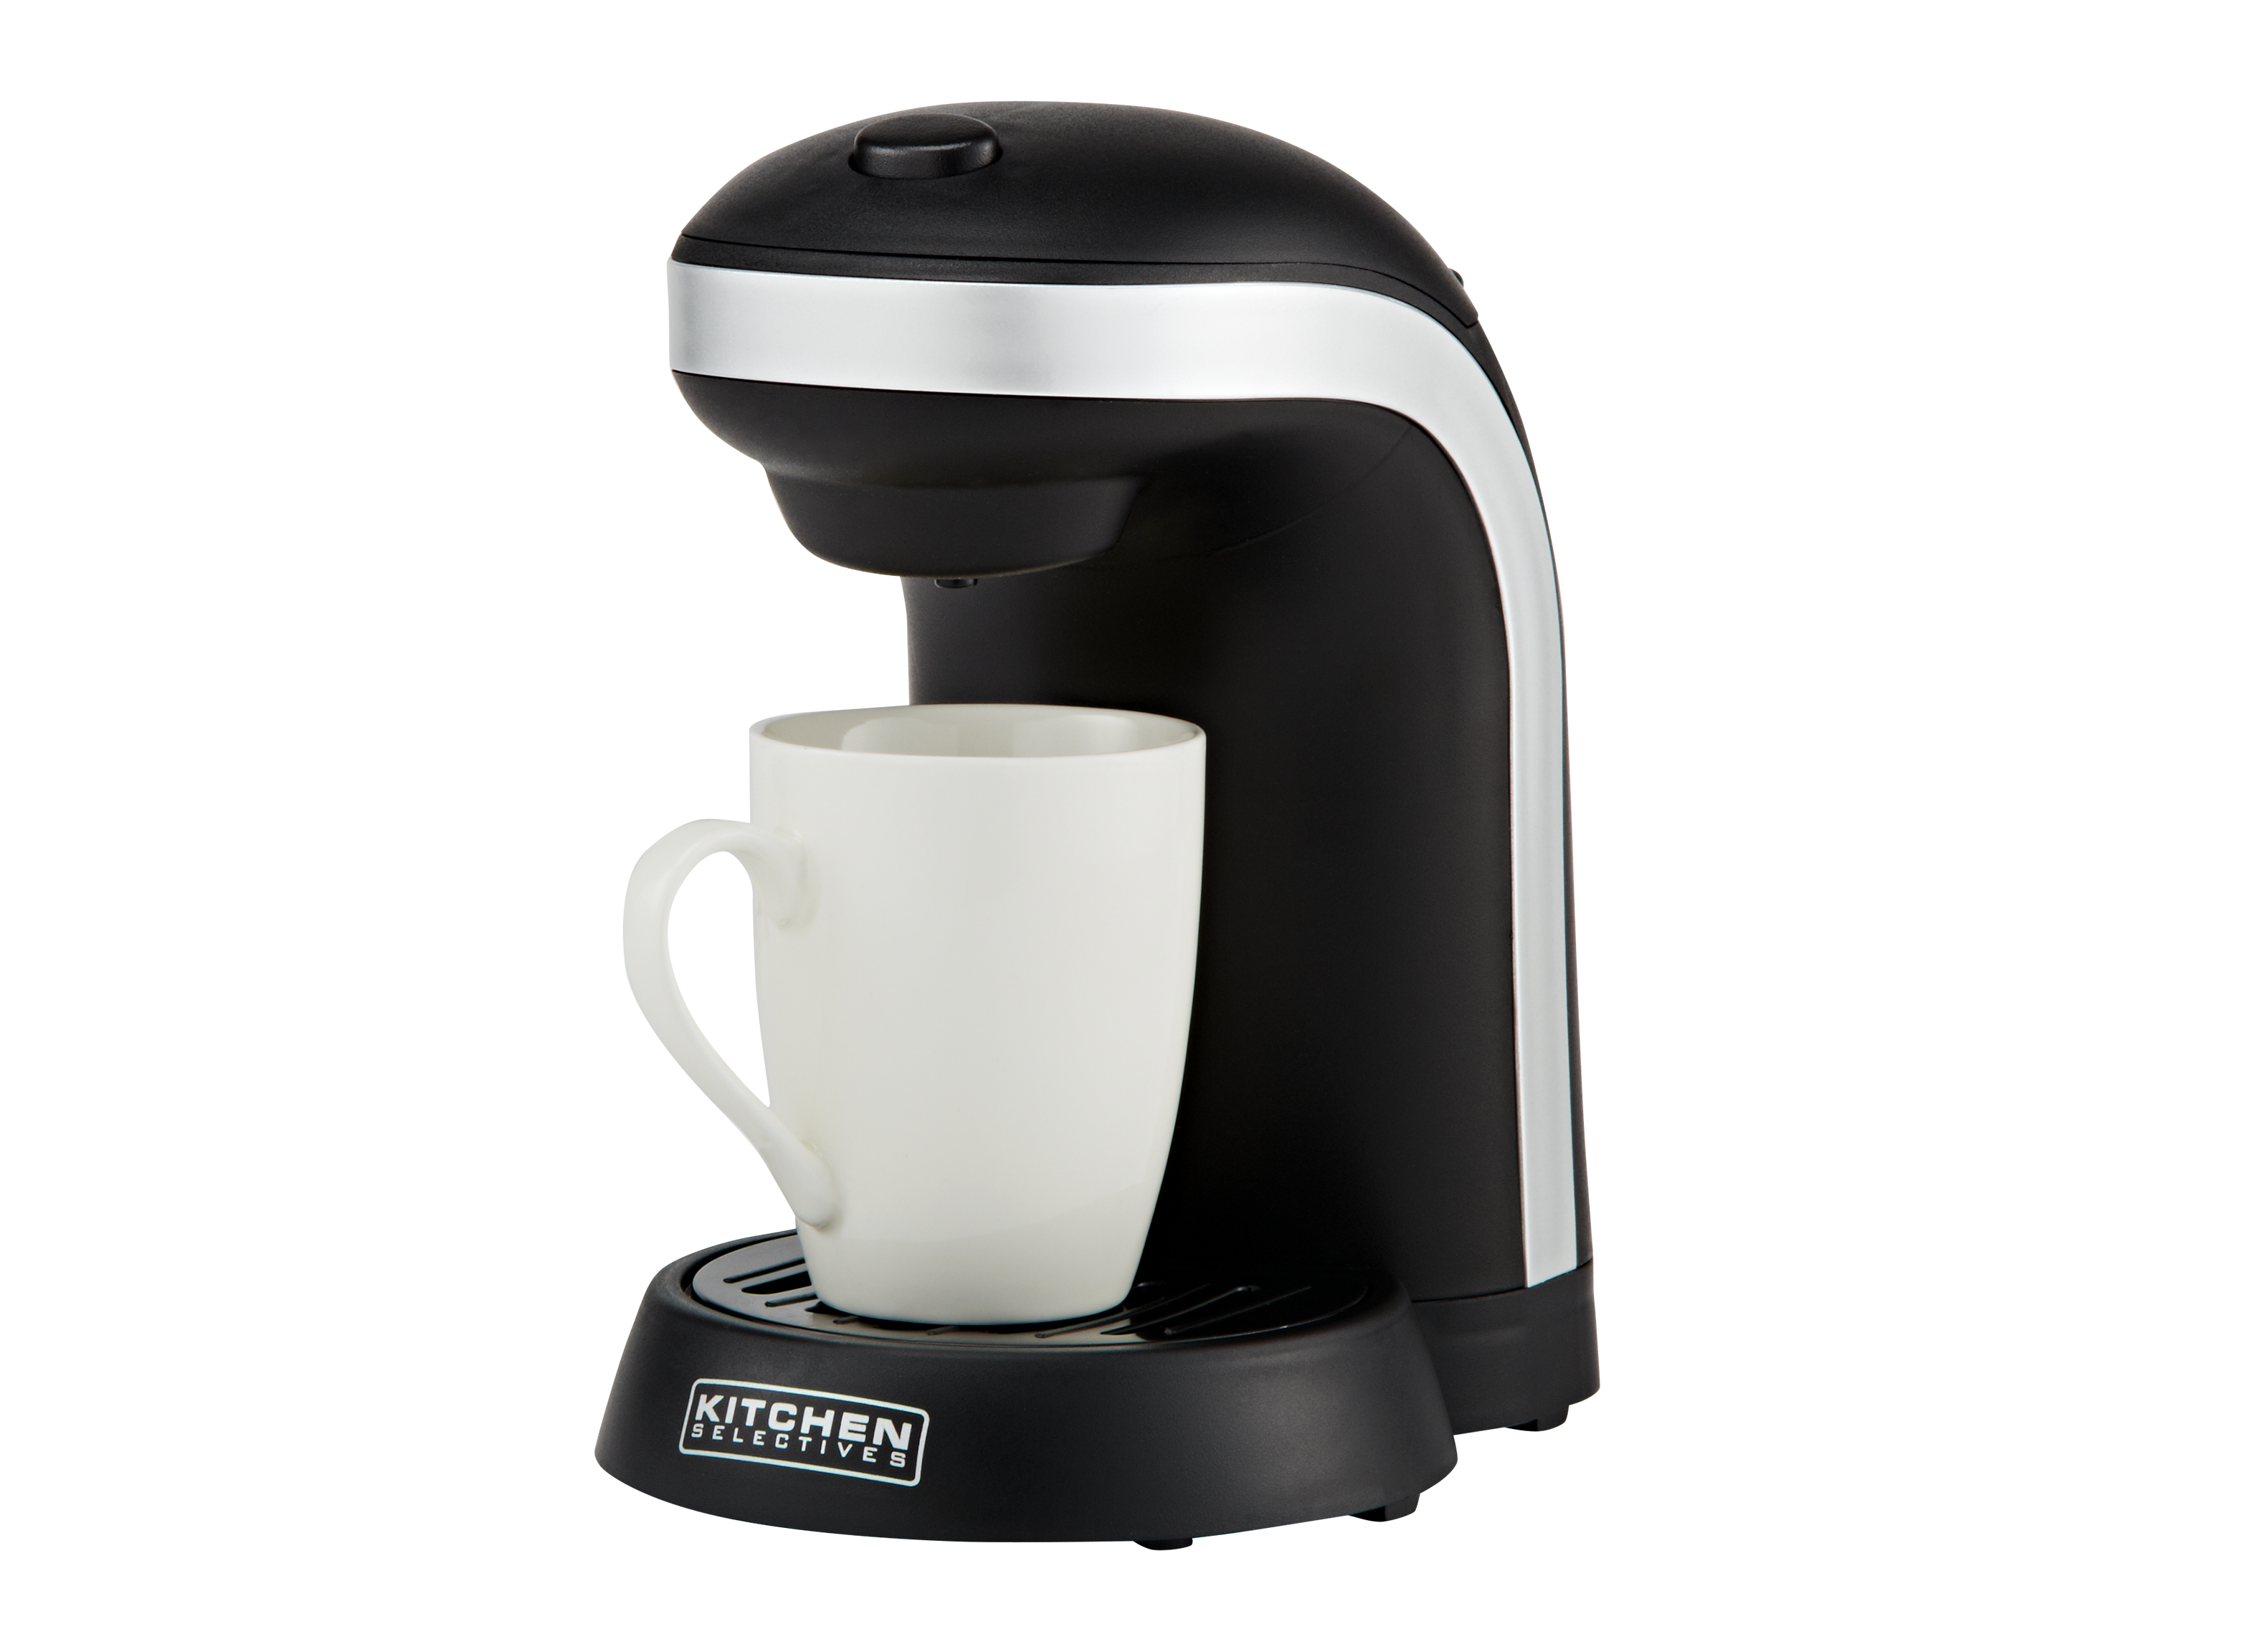 https://crdms.images.consumerreports.org/prod/products/cr/models/231762-coffeemakers-kitchenselectives-cm688.png